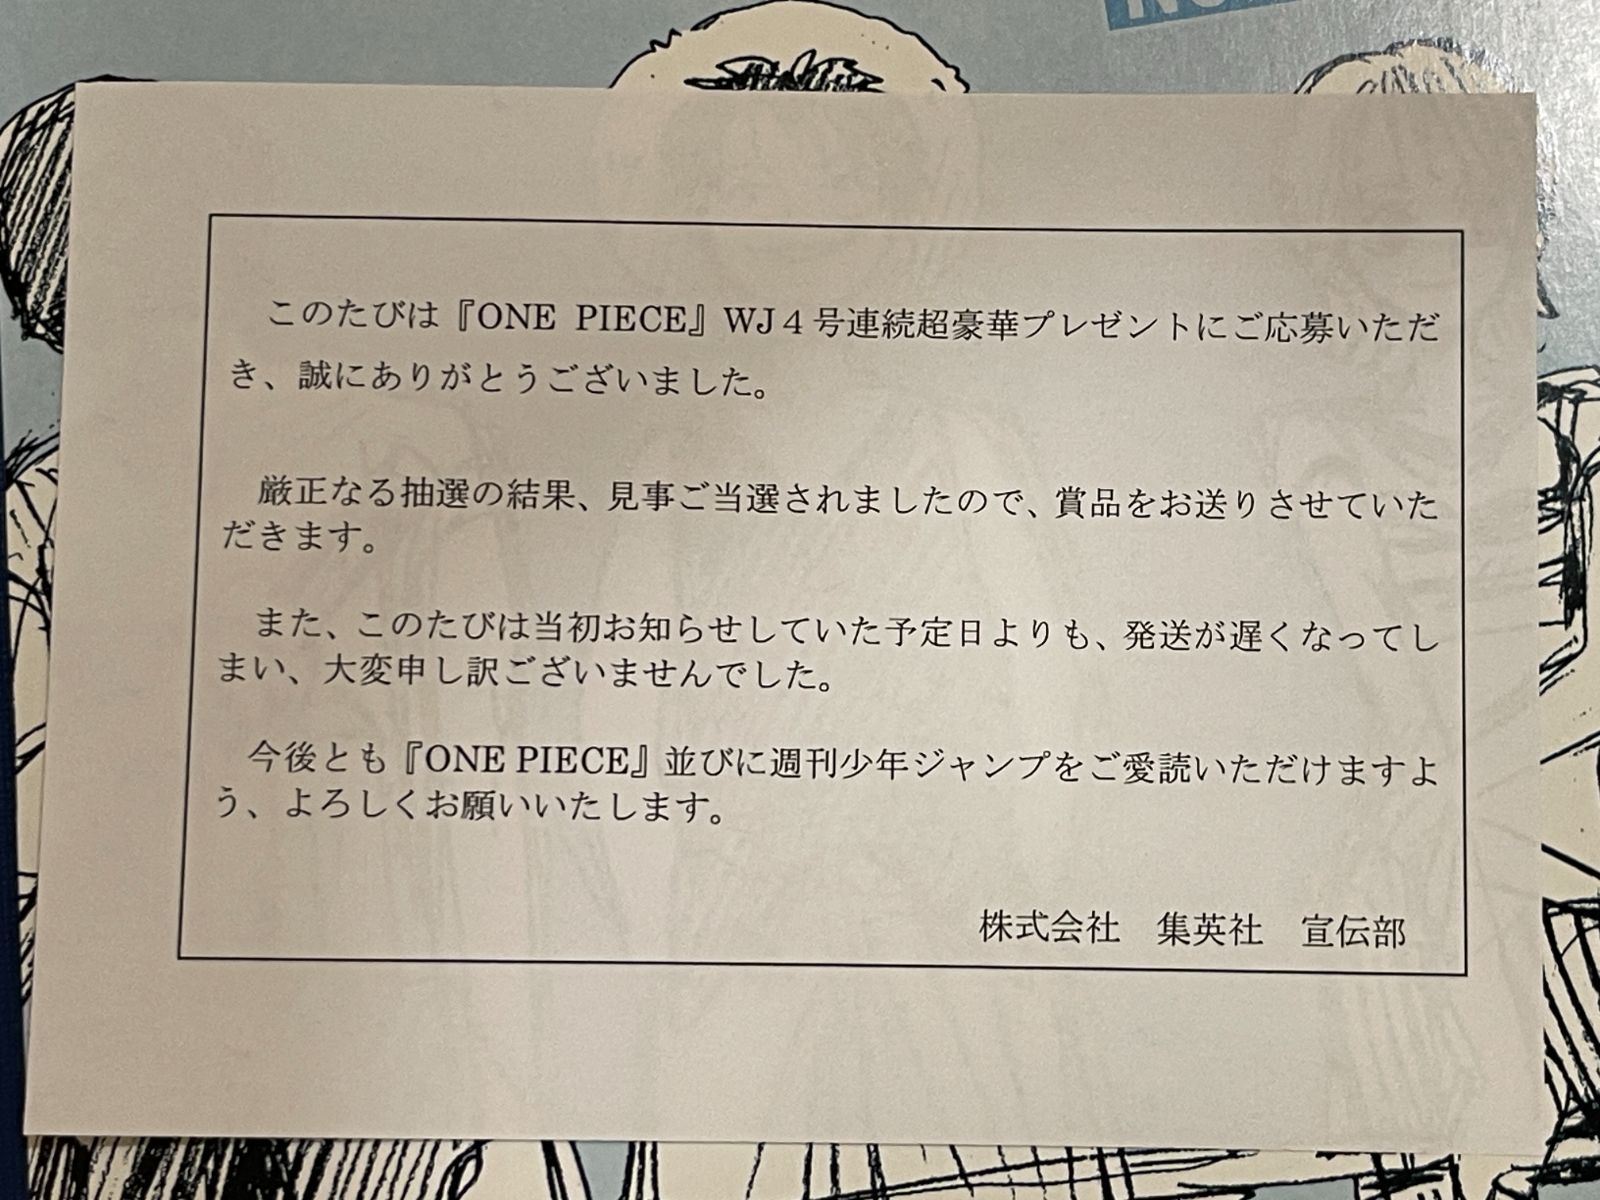 ONE PIECE ワンピース 尾田栄一郎 構想ノートレプリカ 週刊少年 